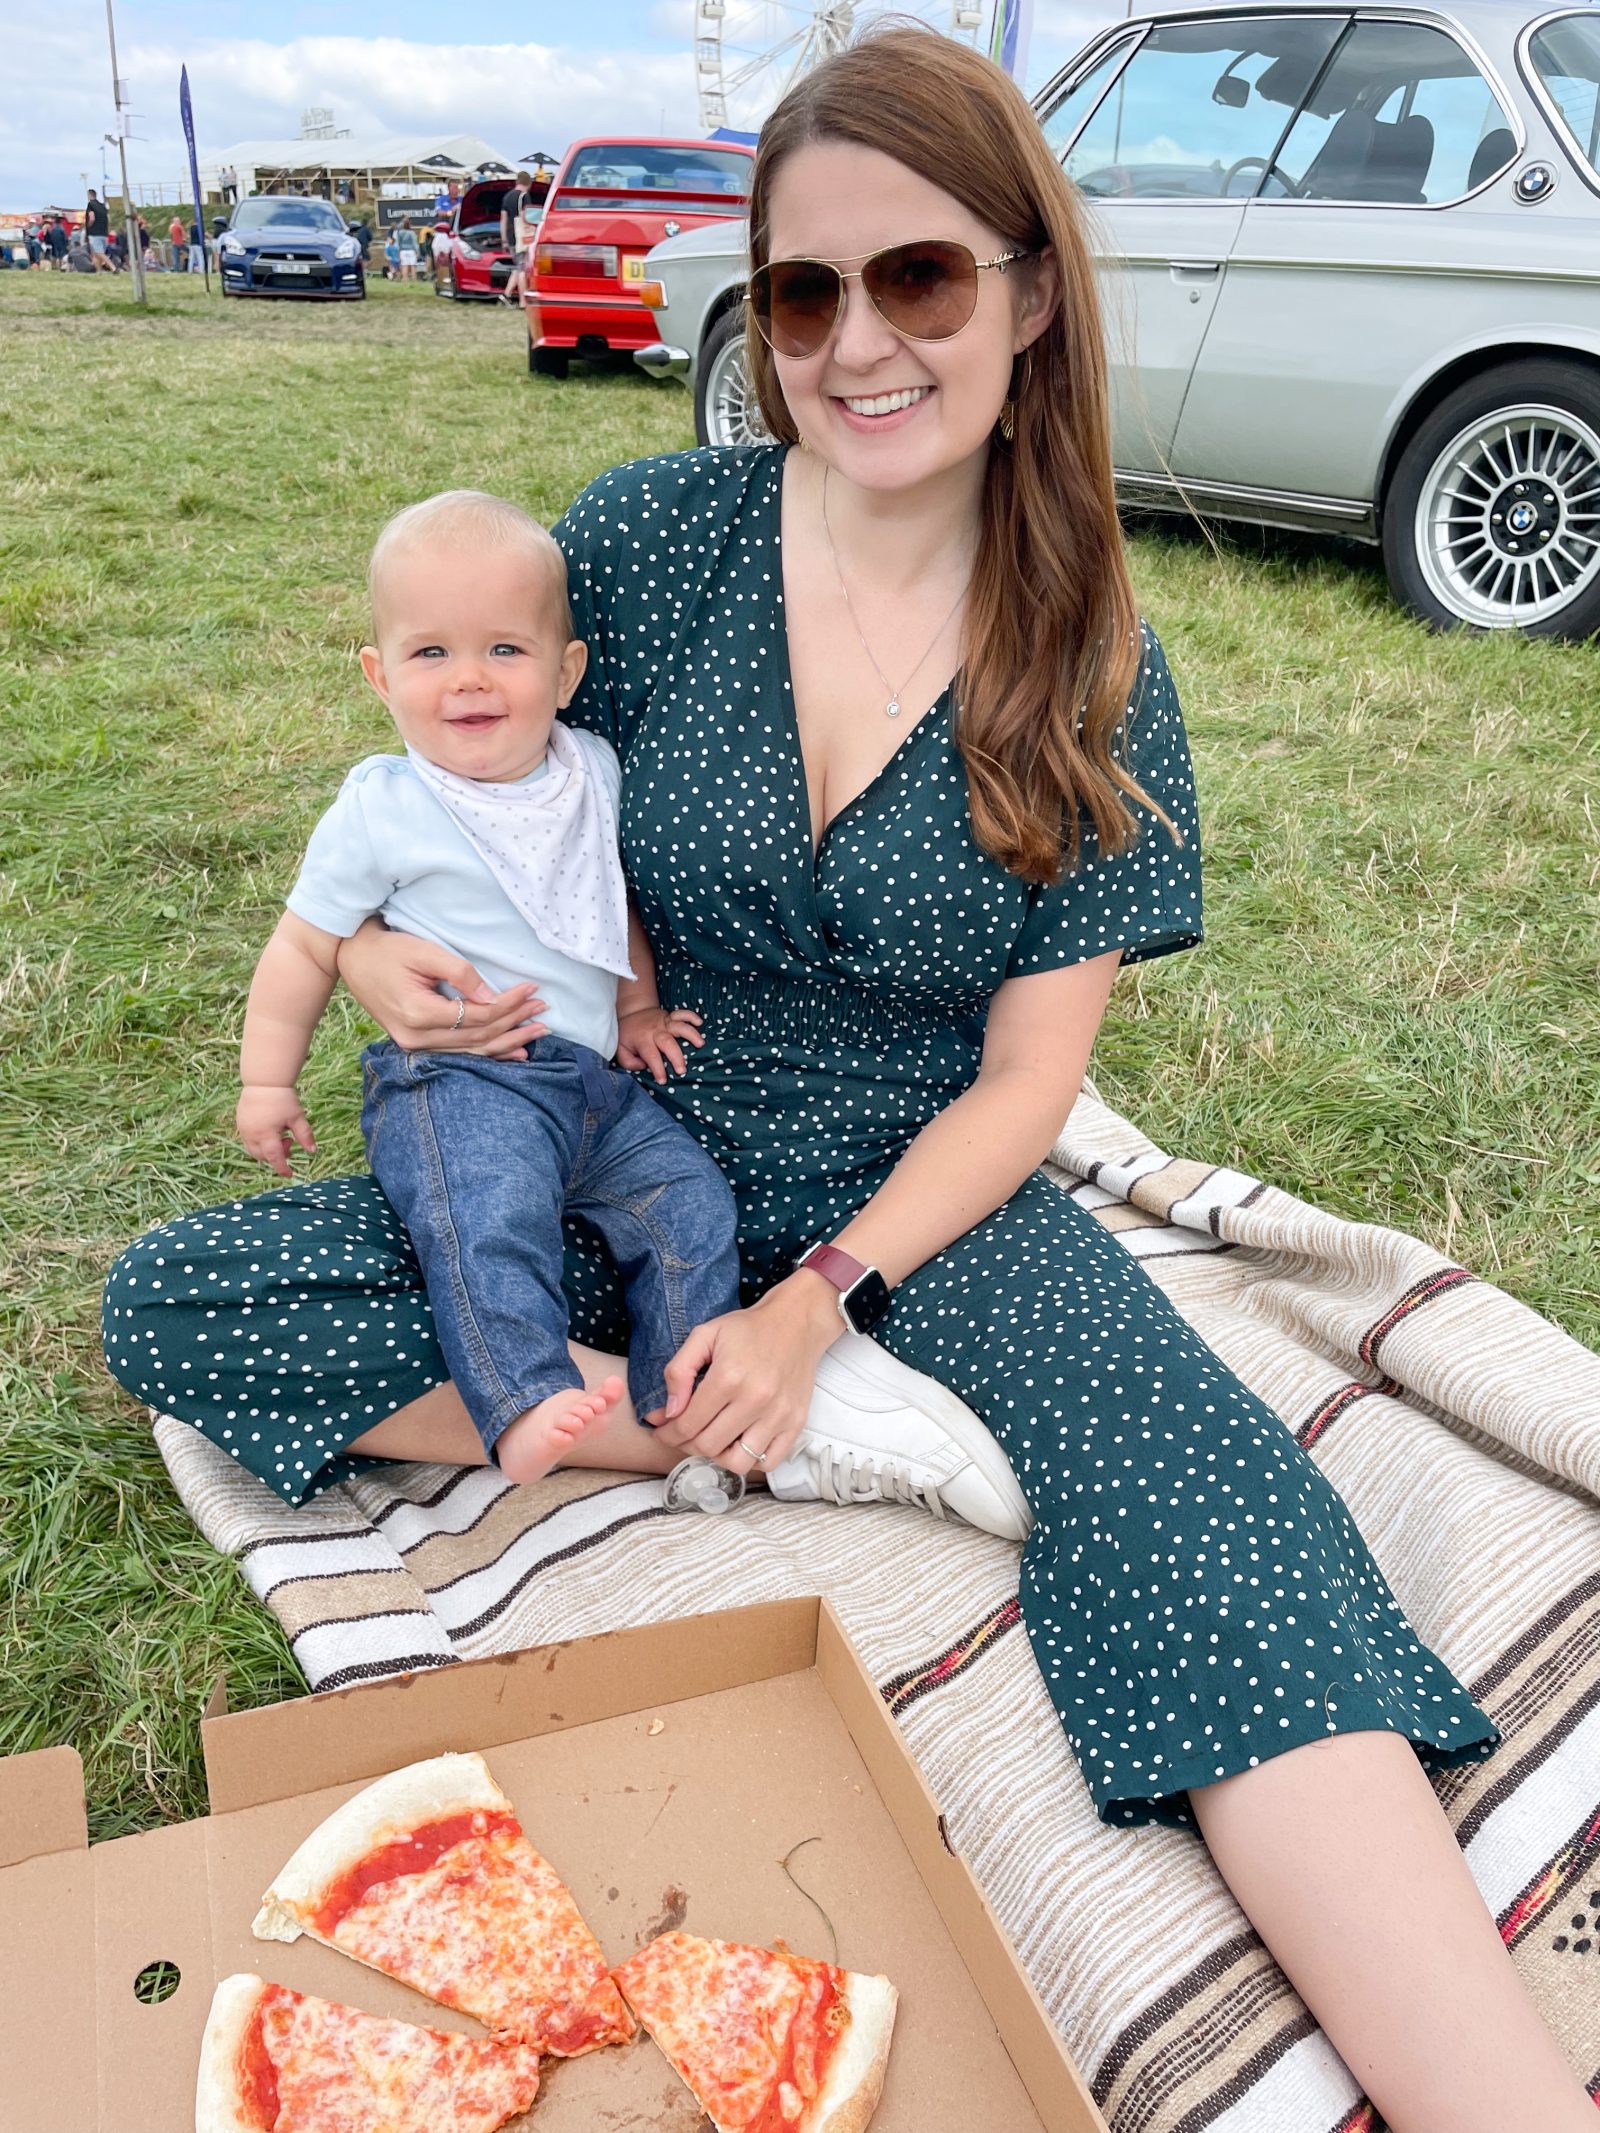 Ami and Arthur with Pizza at Carfest